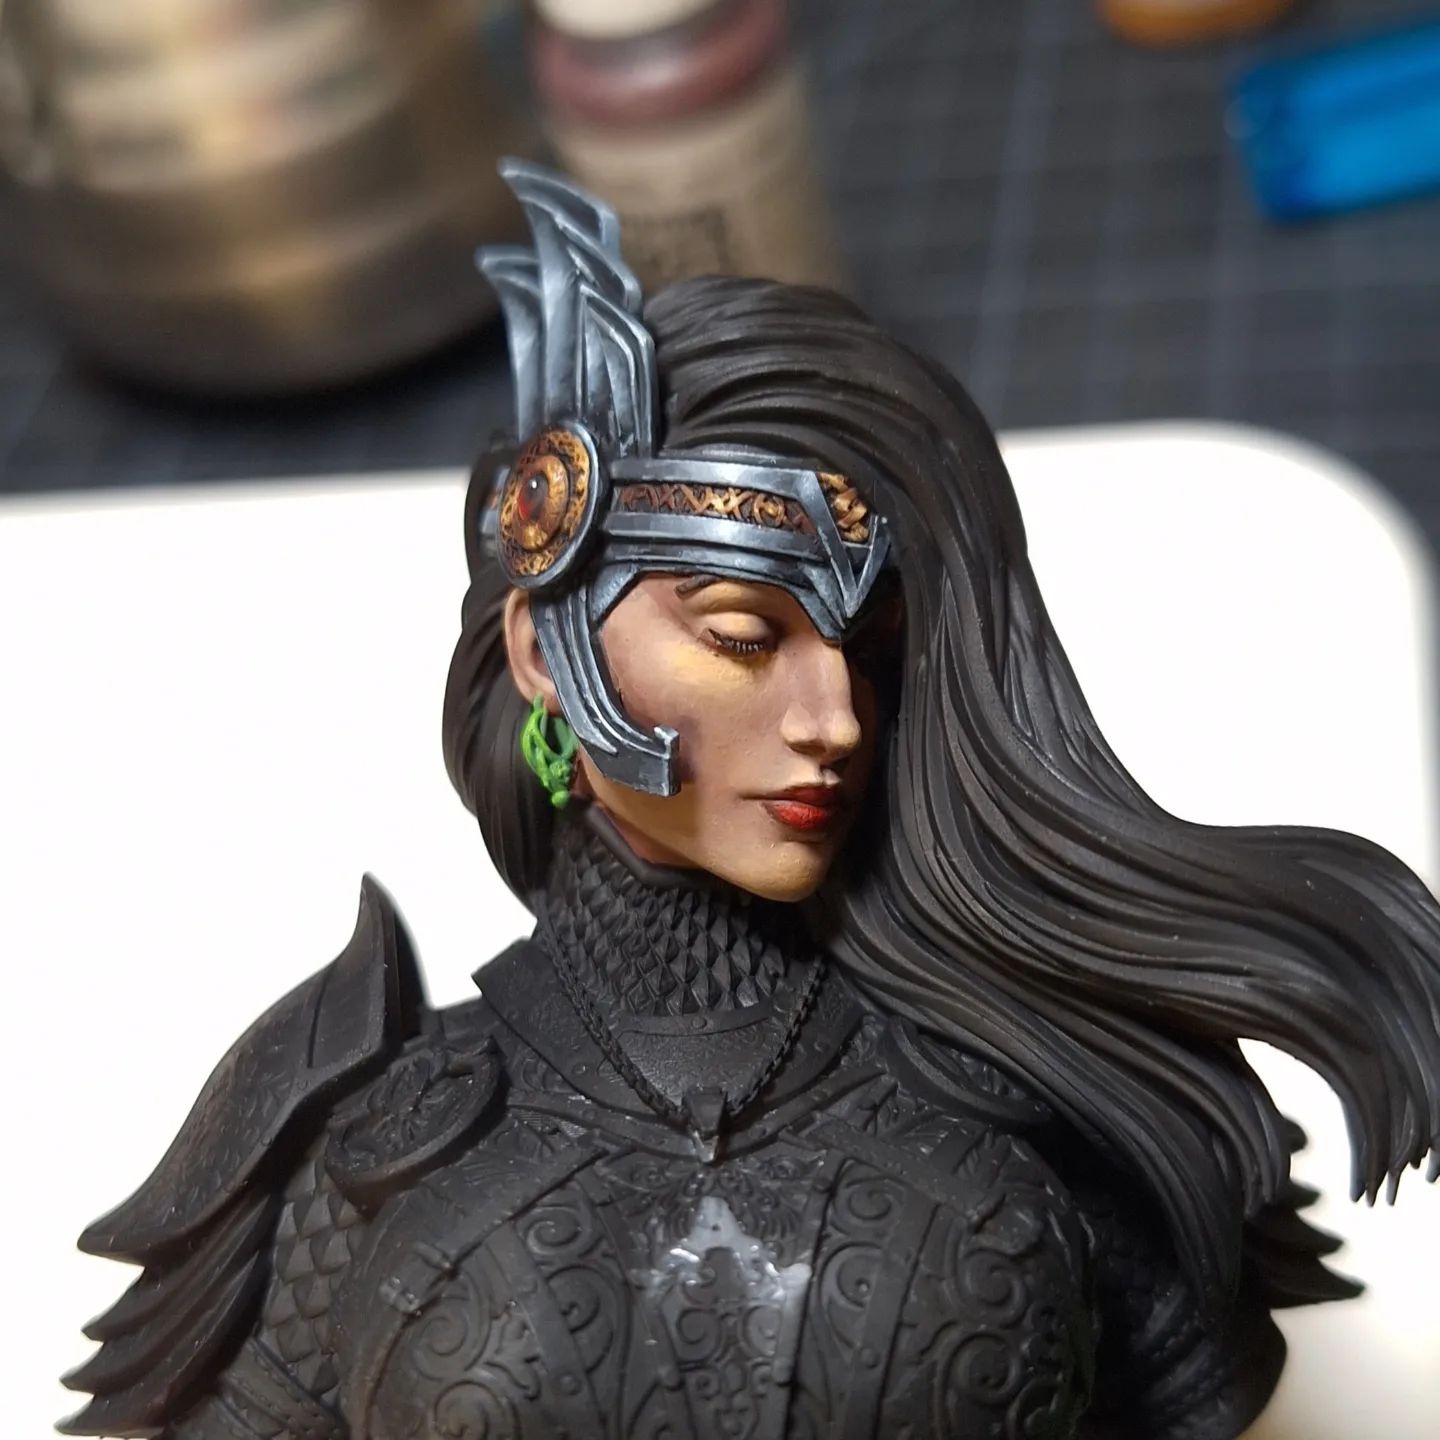 Work in progress. Female warrior bust, it fell and broke her necklace, so I can either make one or just stop working on it (it broke before I started on it but I wanted some practice. #dnd #warrior #female #knight #miniature #bust #dungeonsanddragons